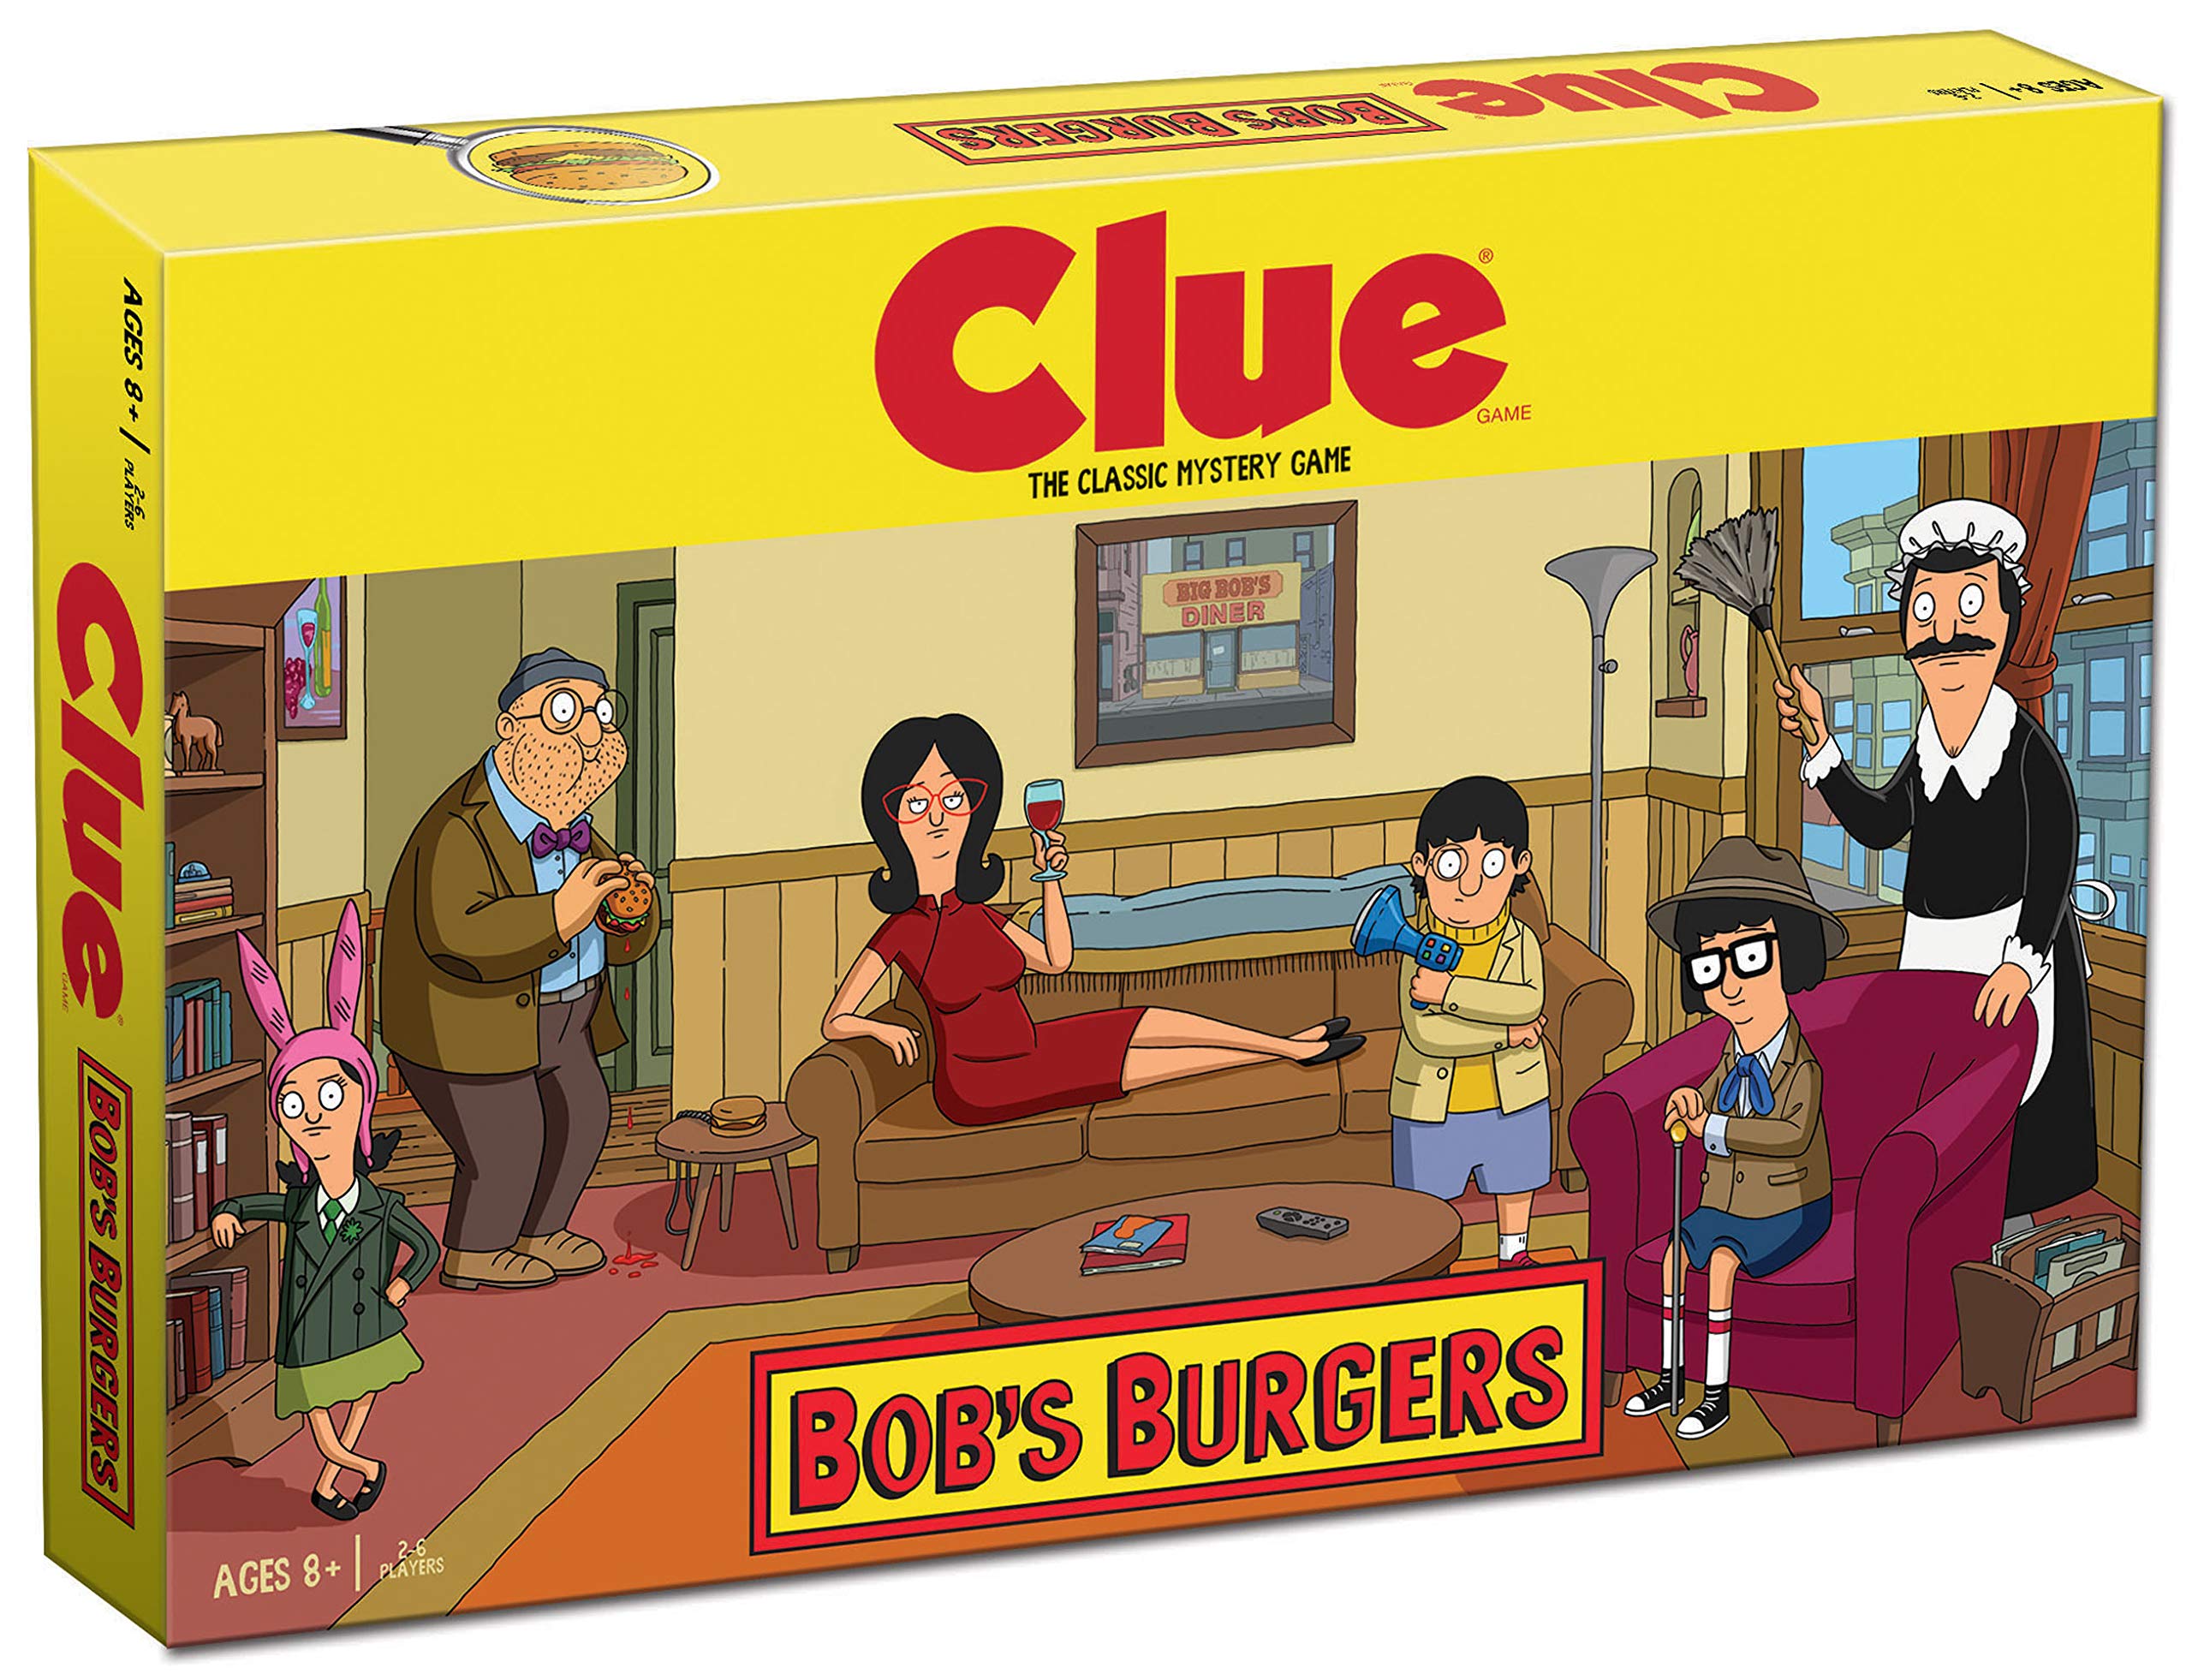 Book Cover Clue Bobs Burgers Board Game | Themed Bob Burgers TV Show Clue Game | Officially Licensed Bob's Burgers Game | Solve The Mystery in This Unique Clue take on The Classic Board Game